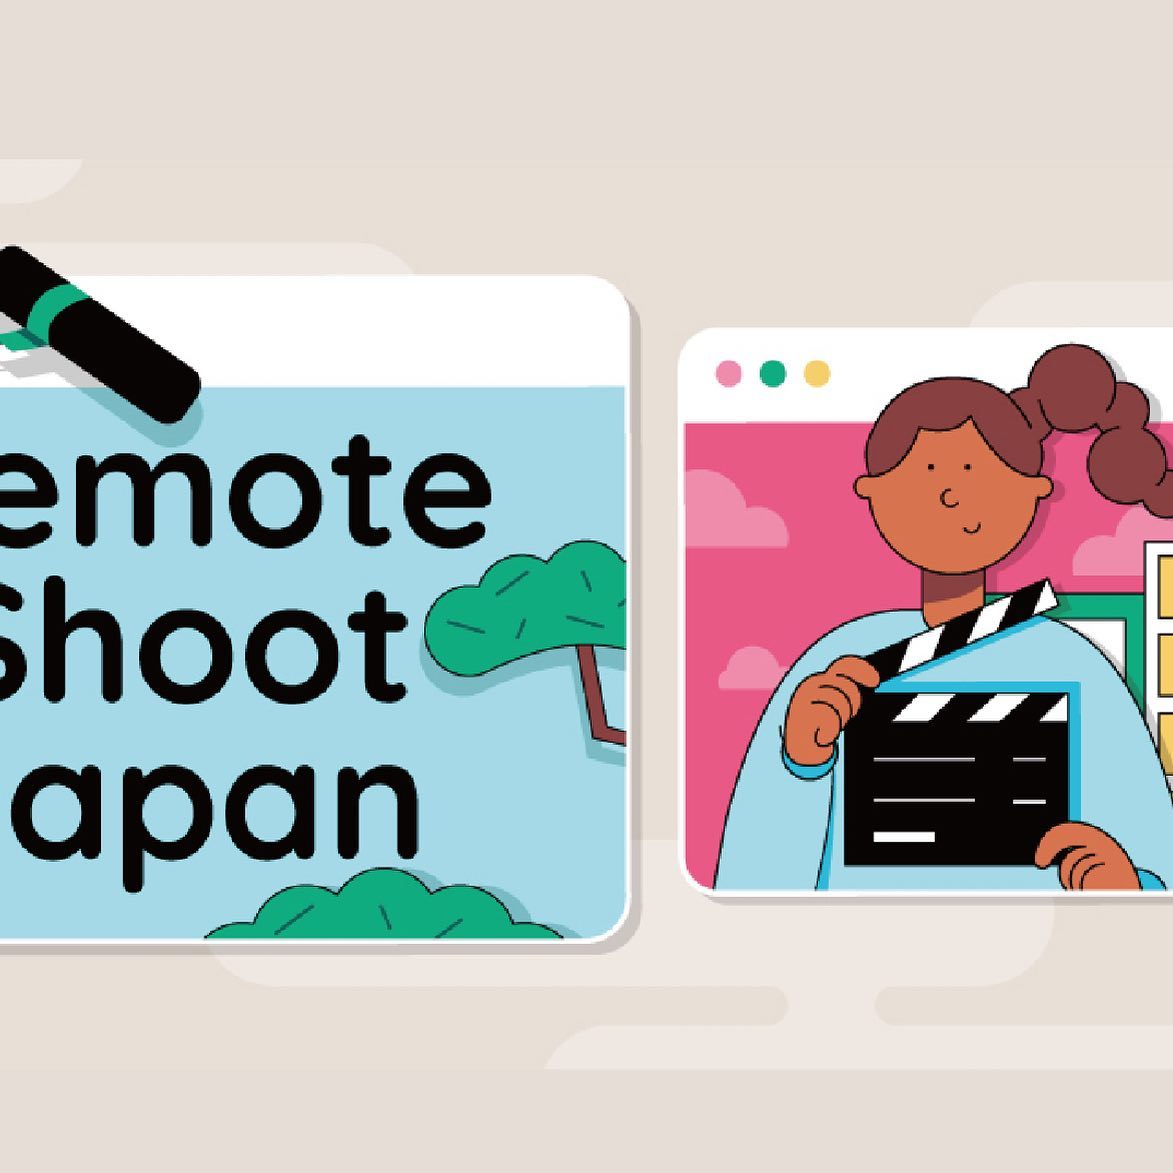 _⁣⁣
We offer a variety of options for remote shooting in Japan!⁣
⁣⁣
Please contact us through the website in our bio for details⁣

⁣